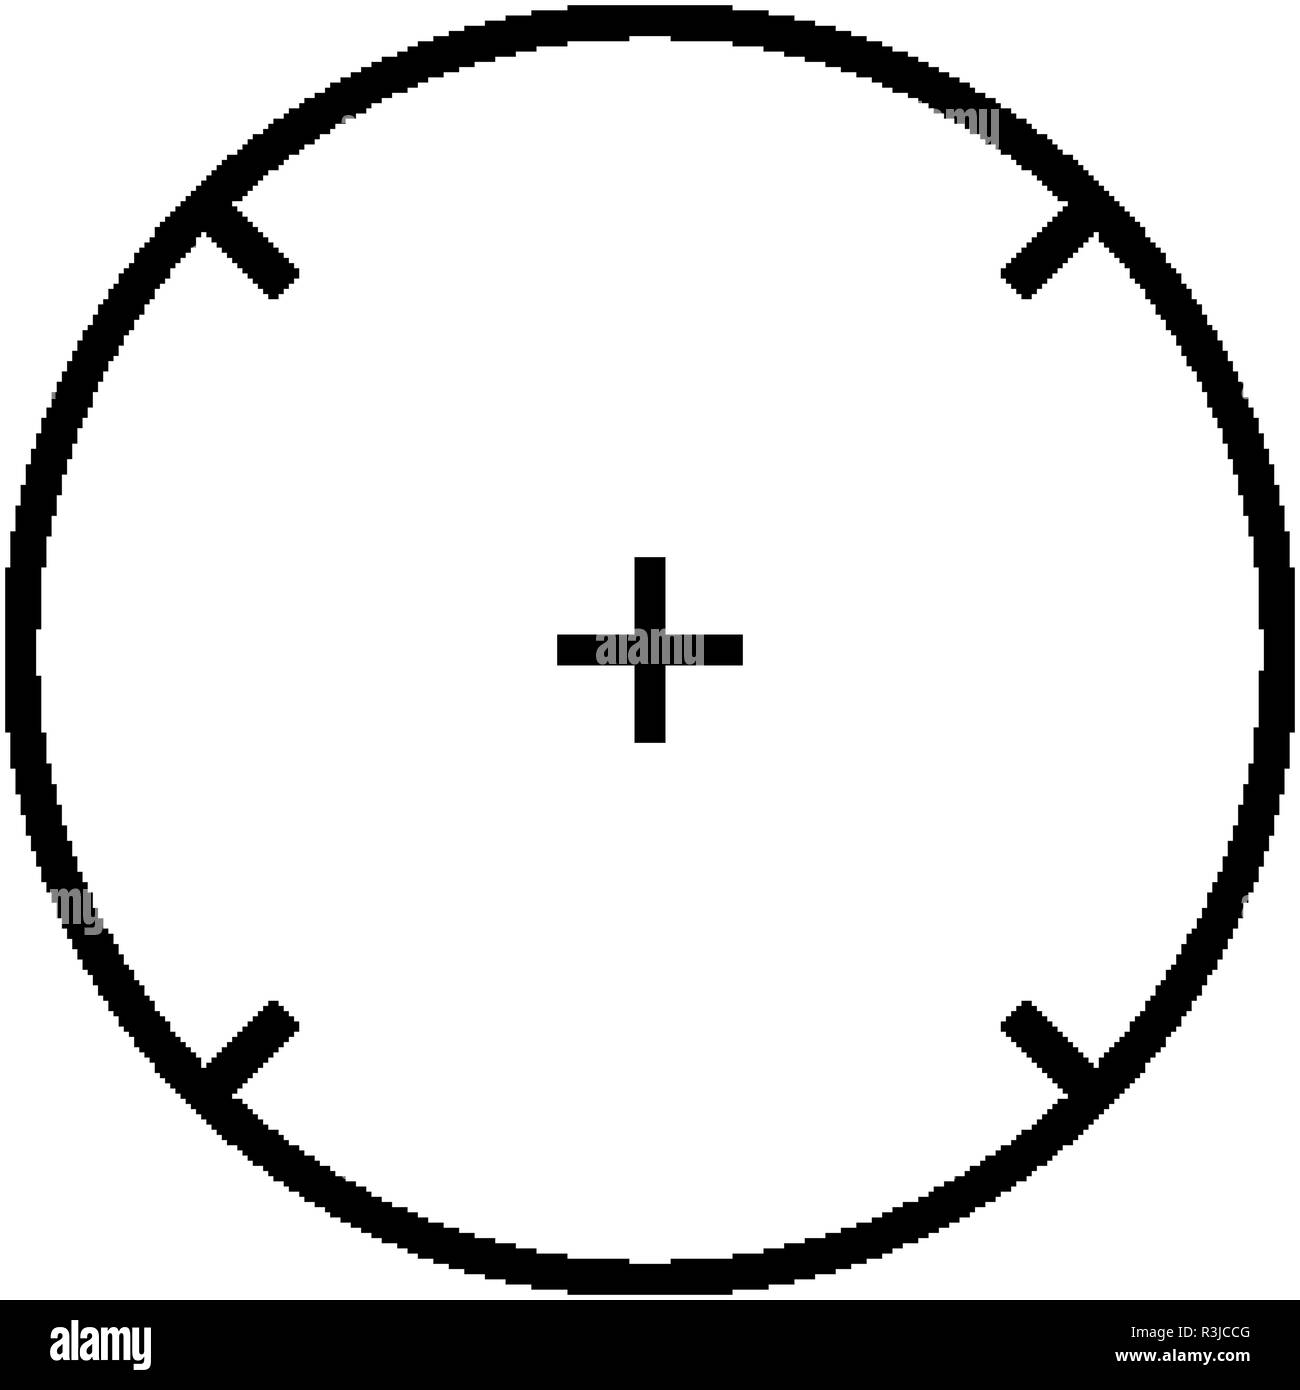 Simple sniper target black icon isolated on white background. Stock Vector